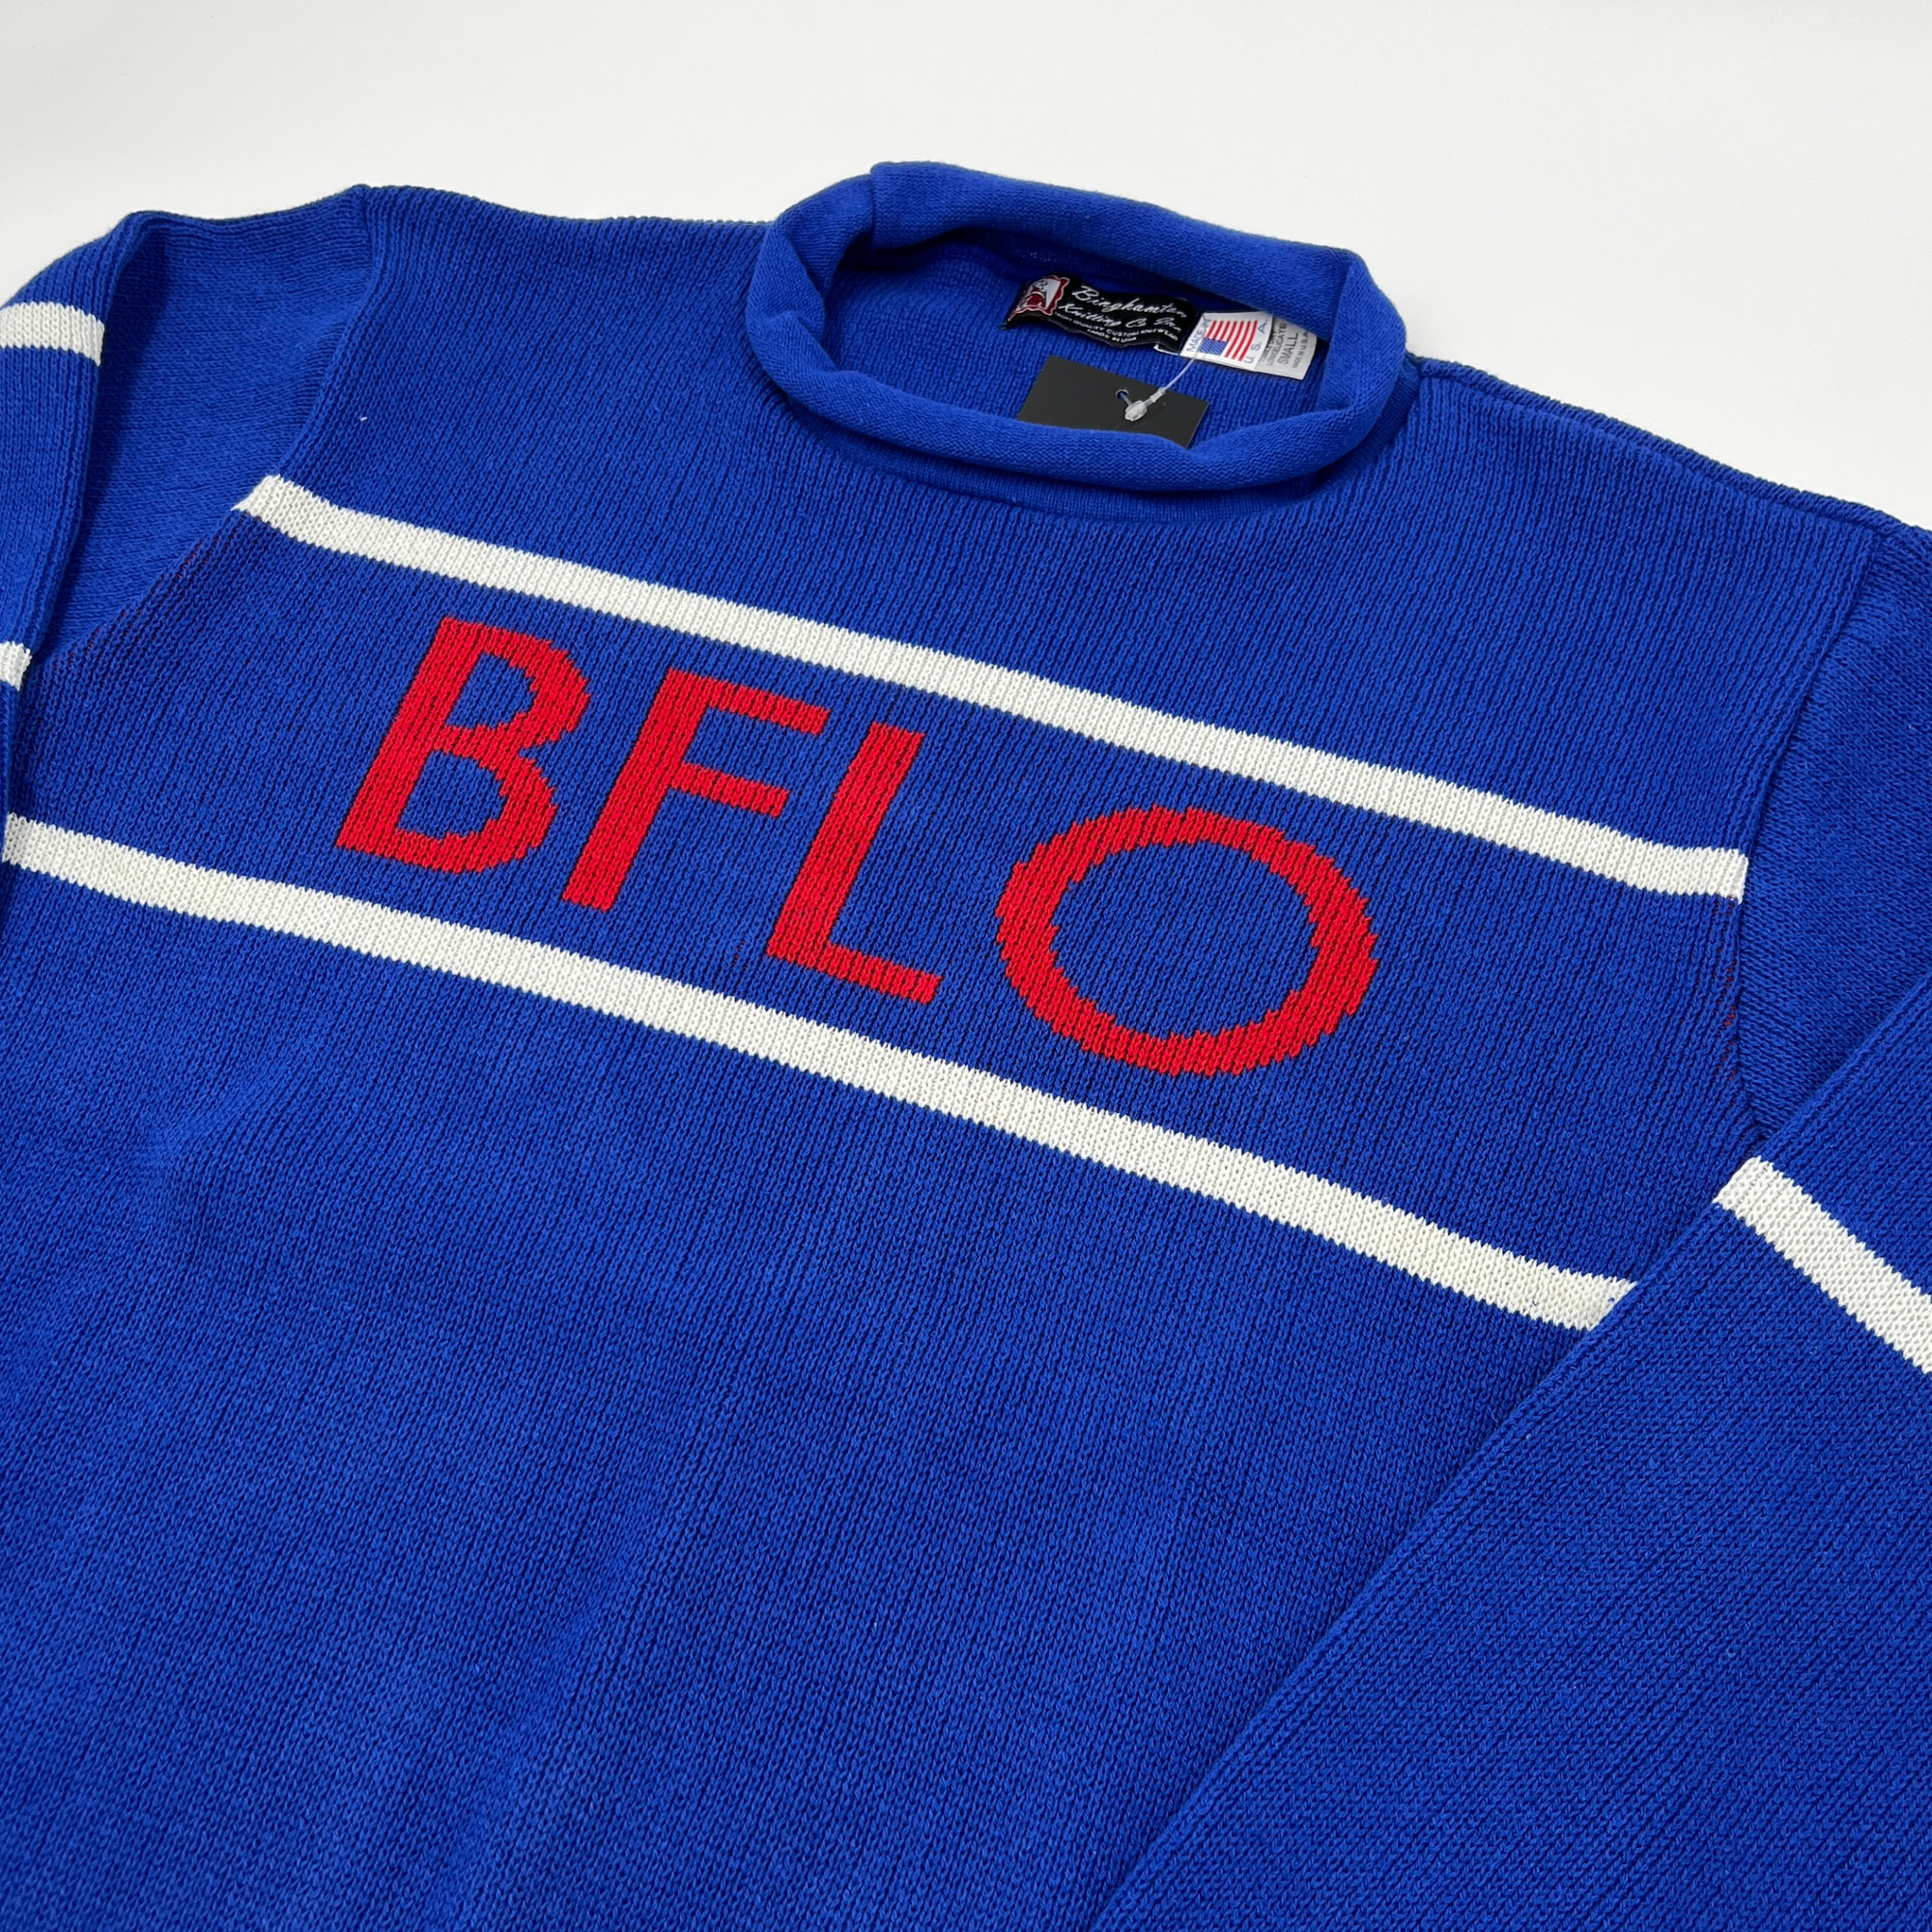 BFLO Royal Blue Rollneck High Quality Pullover Sweater